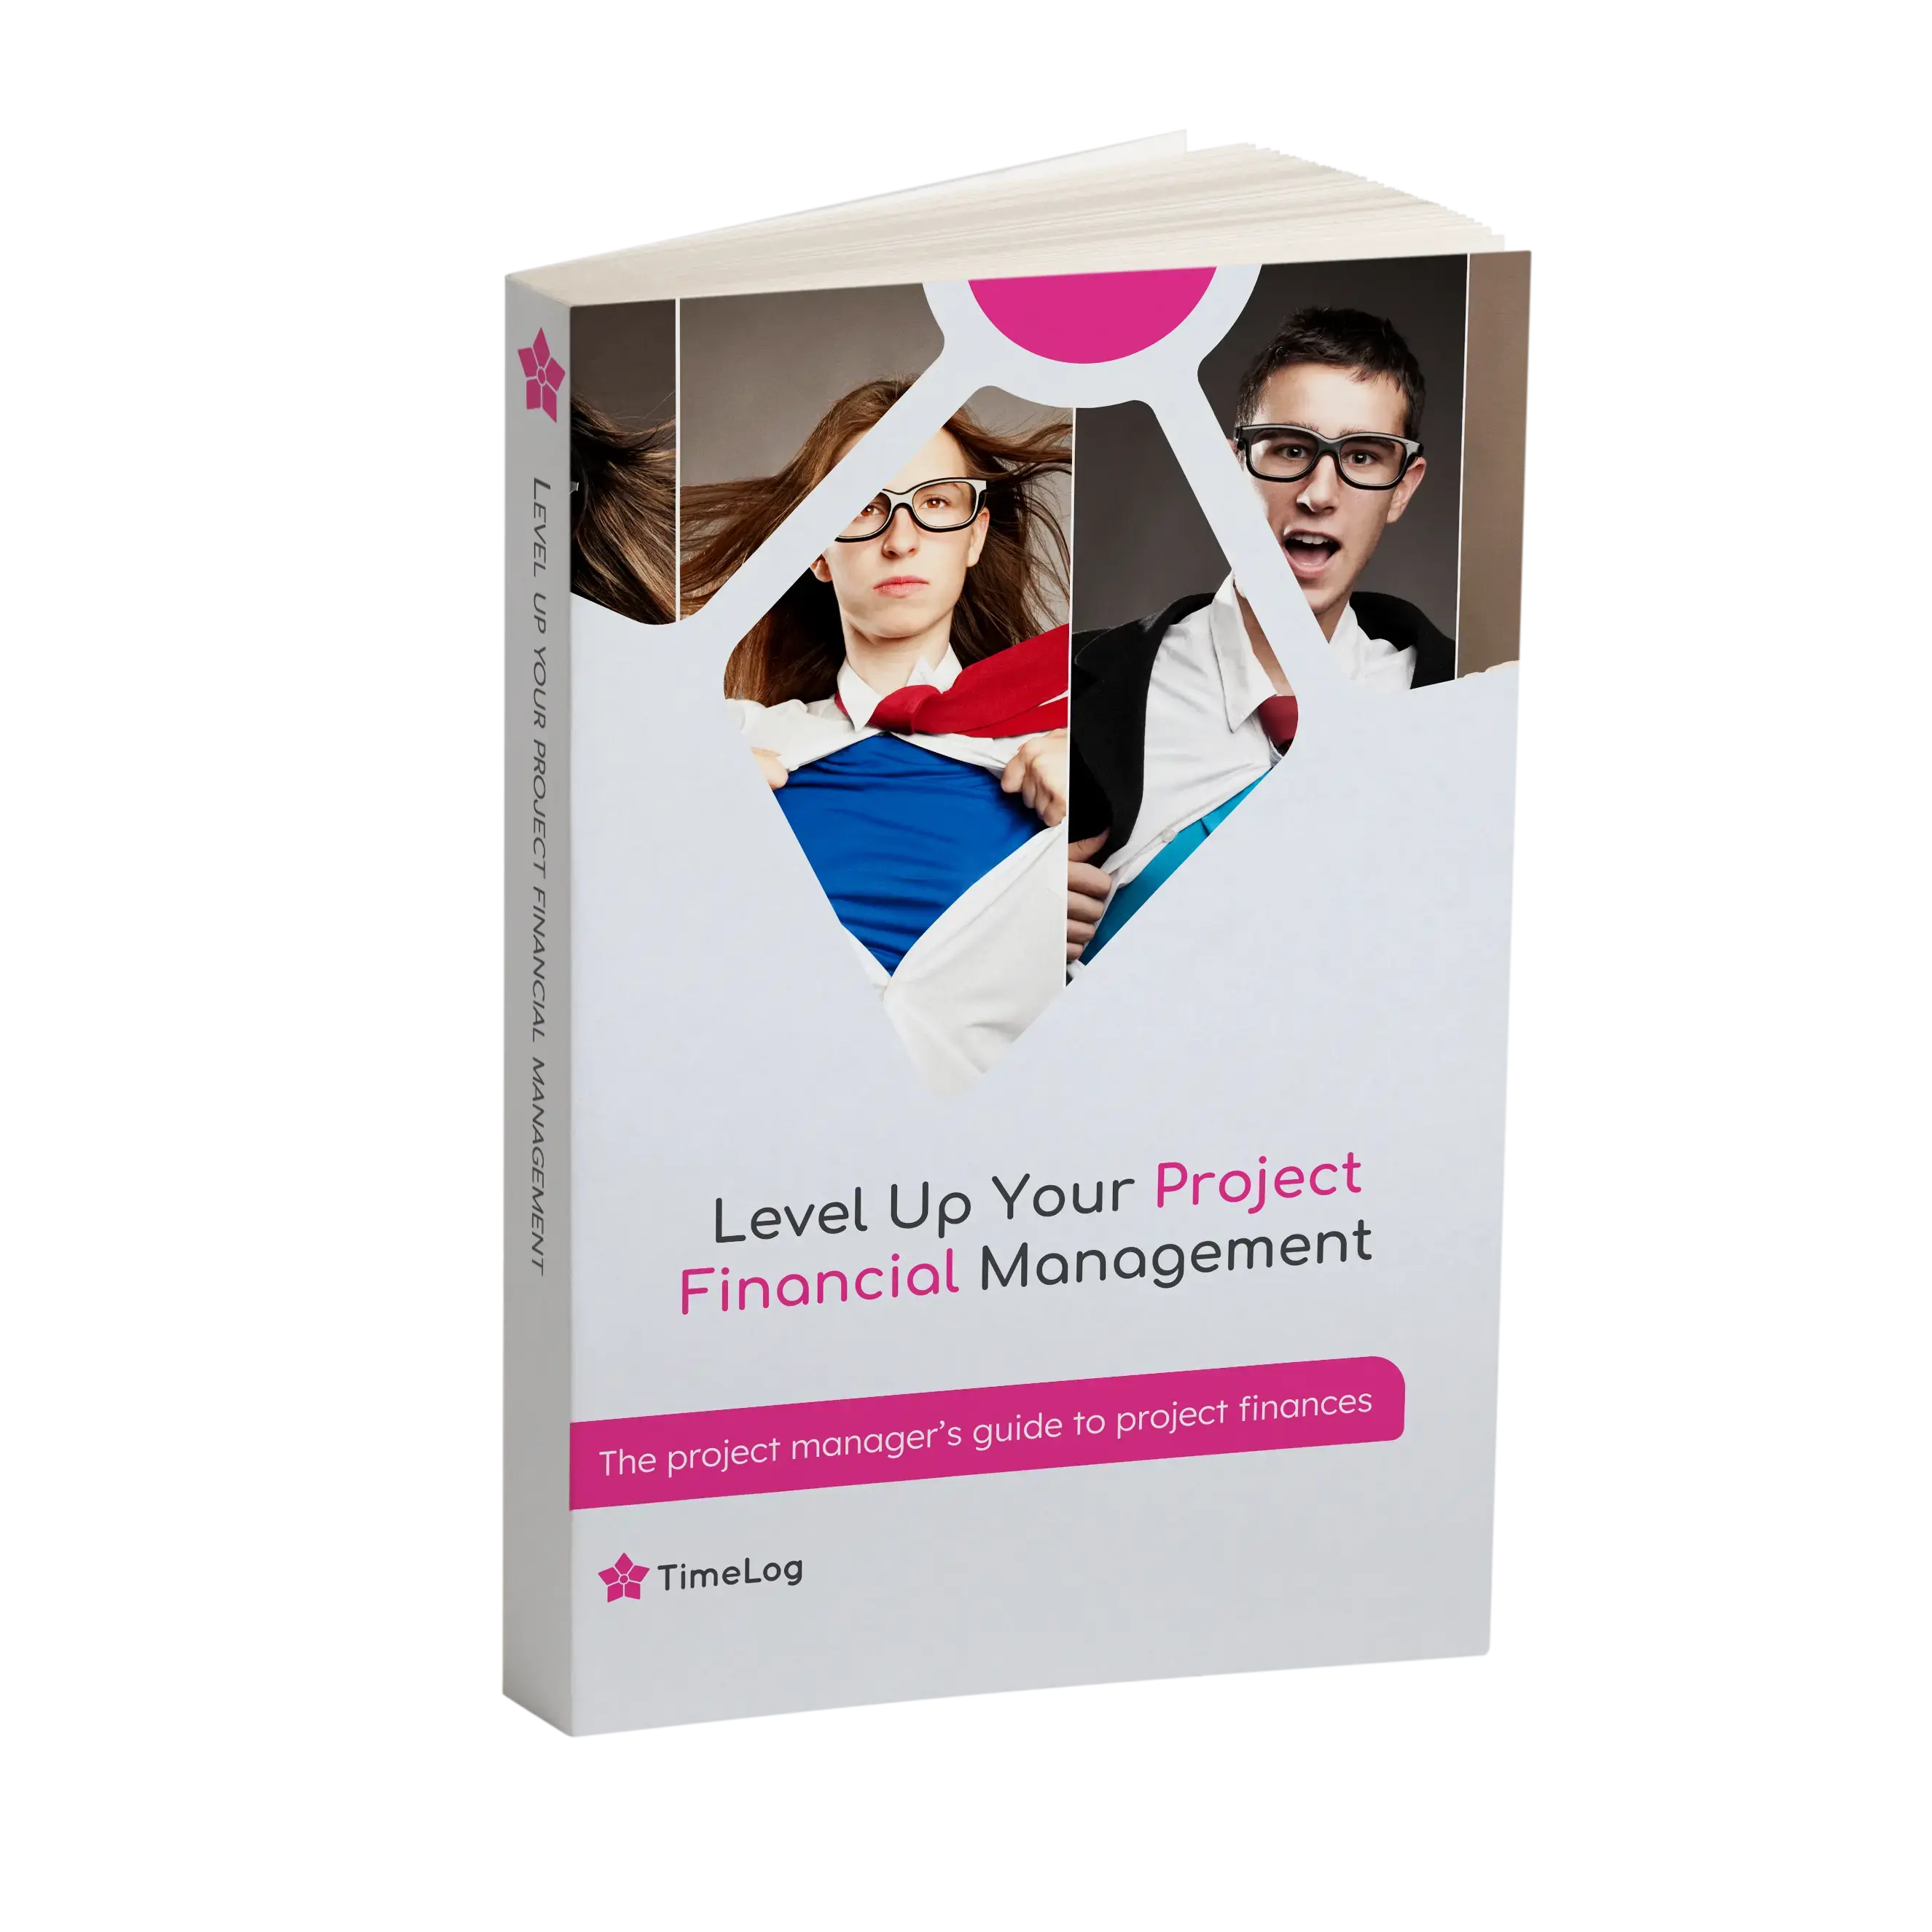 Level Up Your Project Financial Management